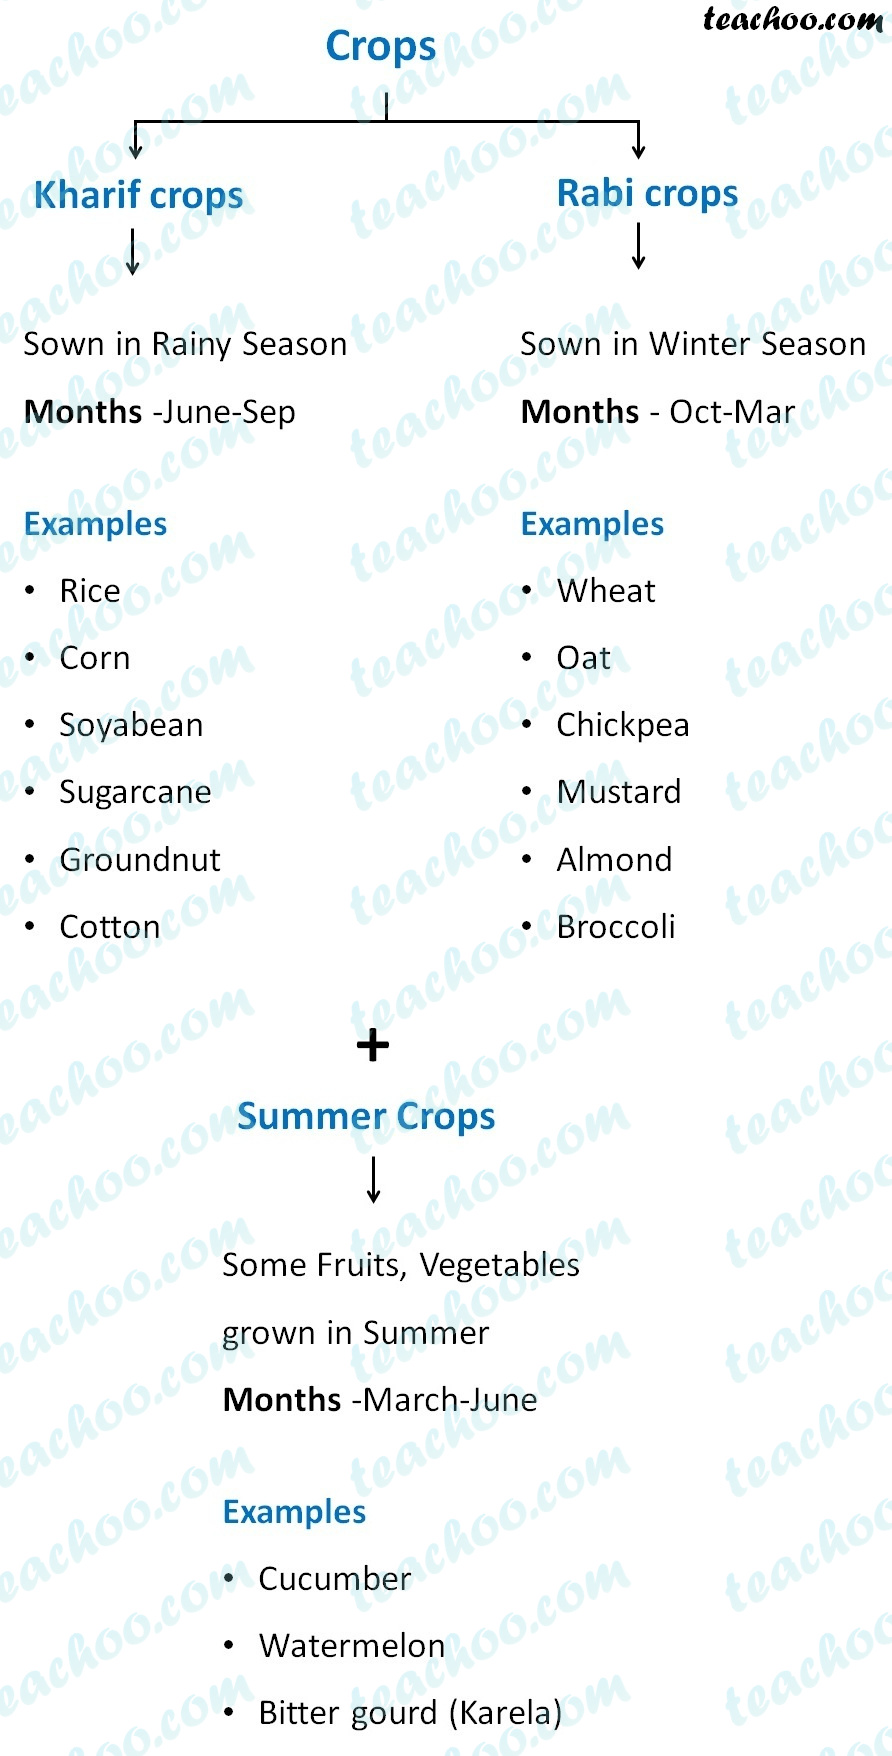 summary-of-different-types-of-crops (1).jpg